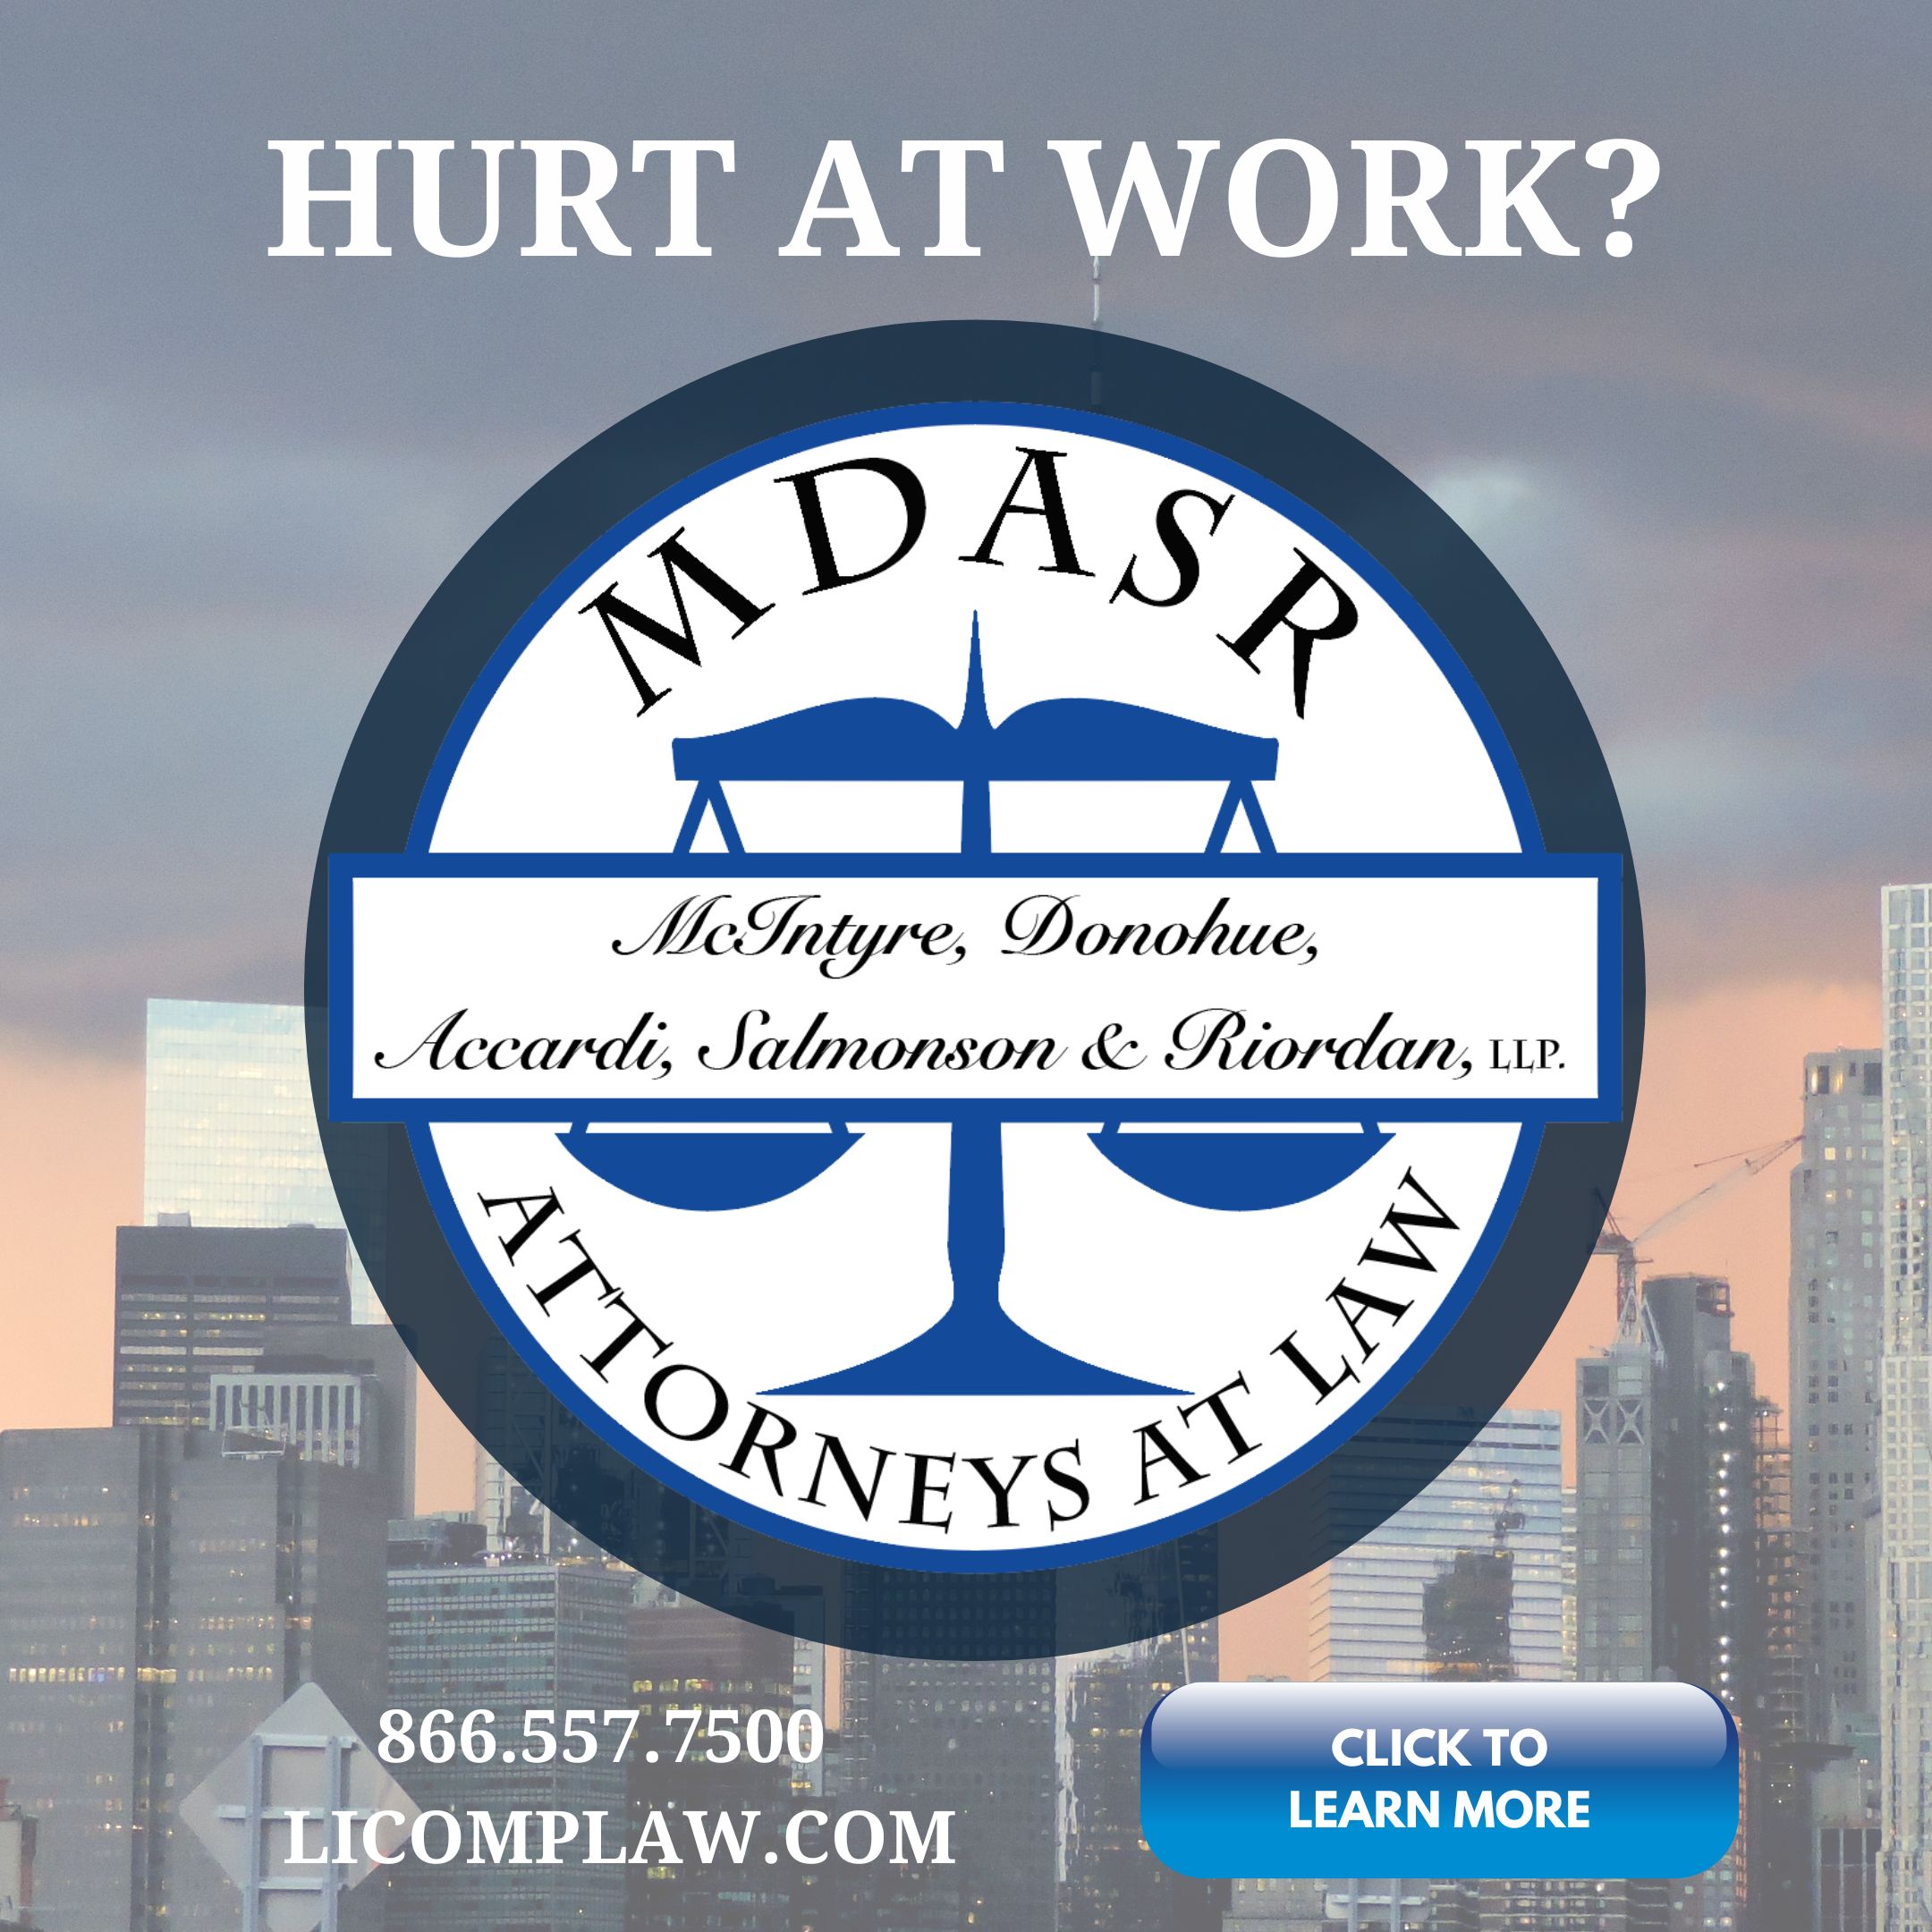 MDASR, LLP — NY and Long Island's Work Injury Law Firm